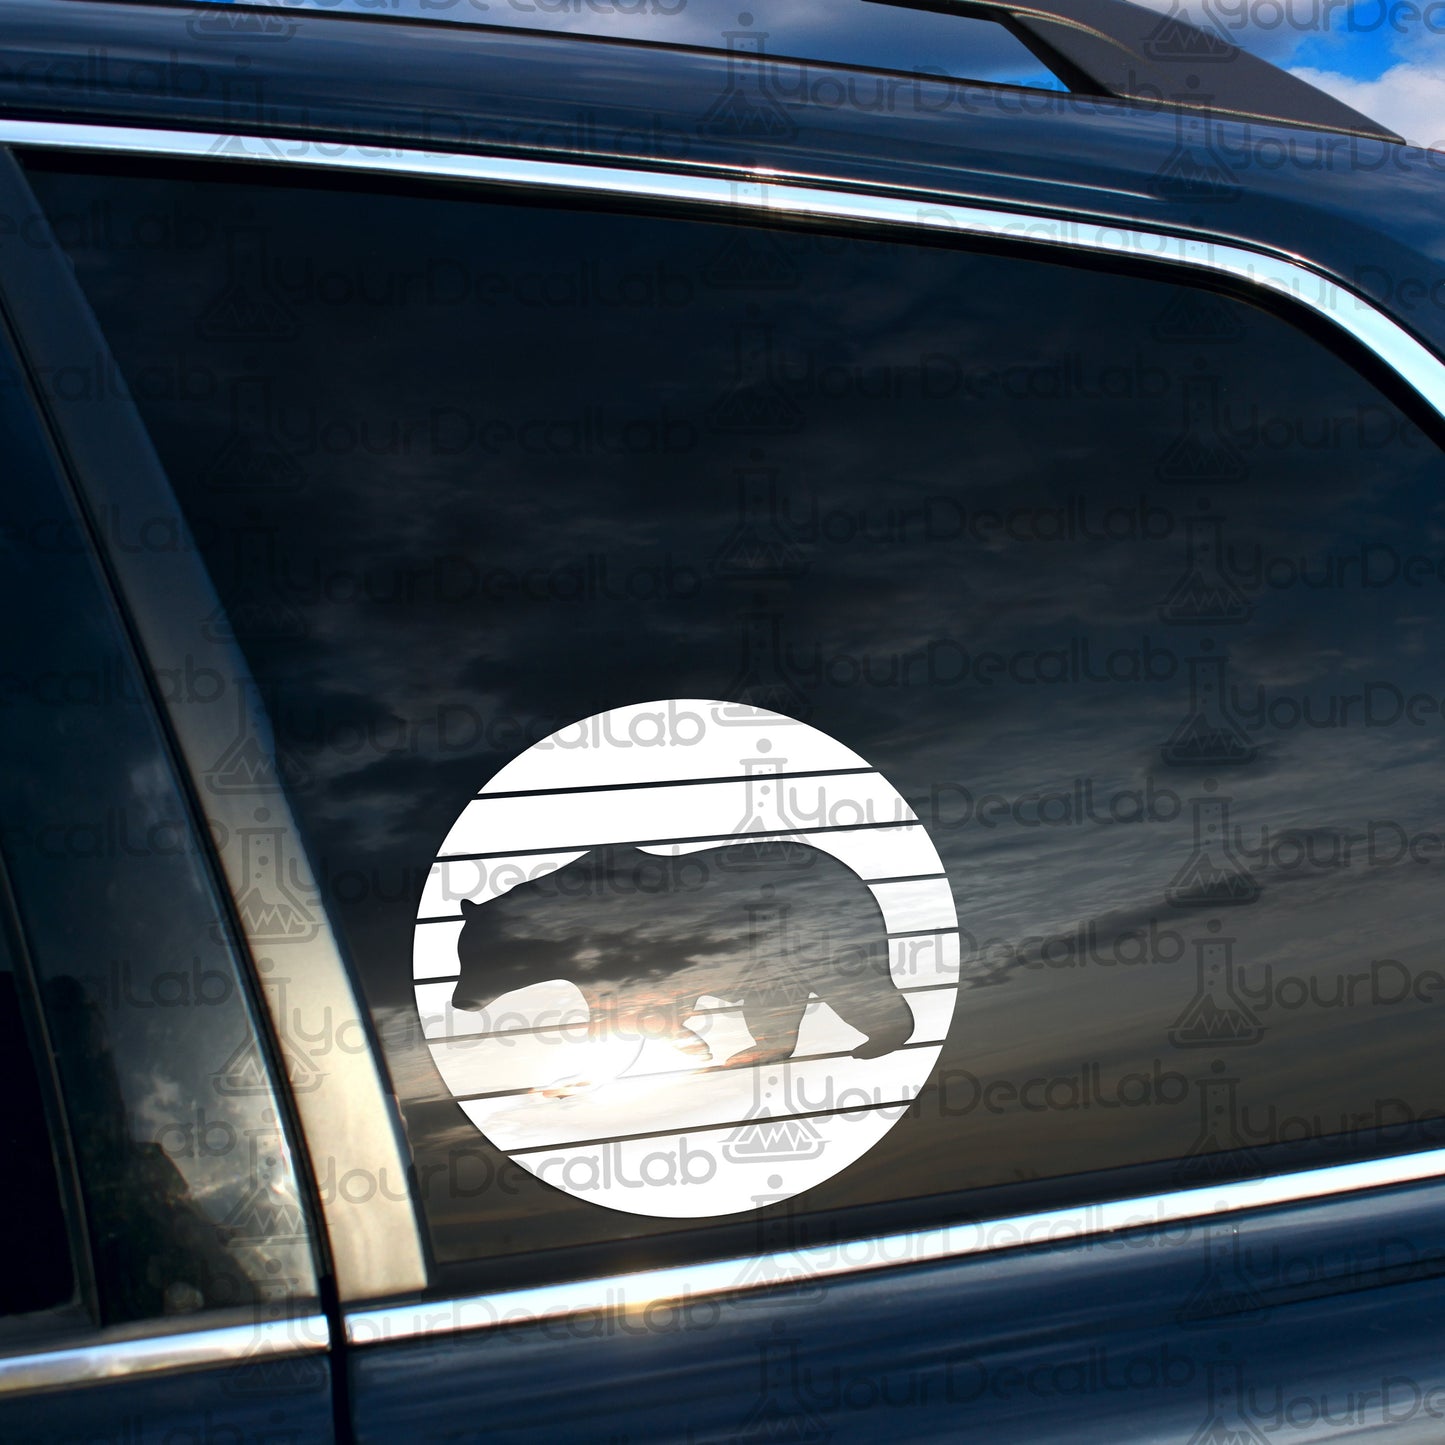 a bear sticker on the side of a car